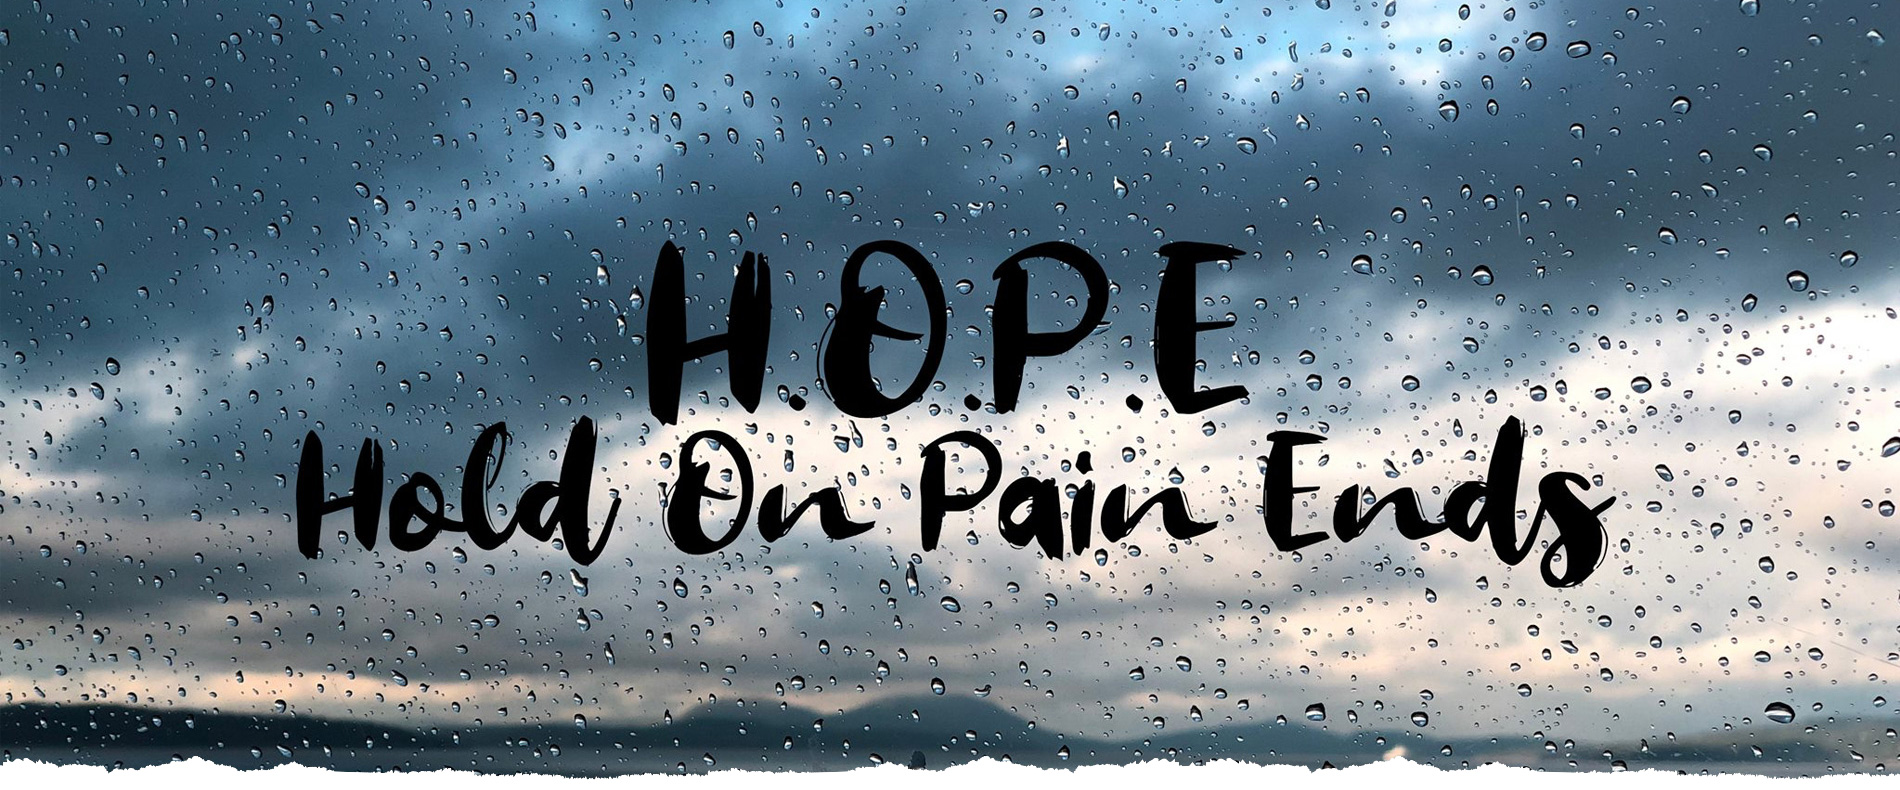 HOPE: Hold On, Pain Ends